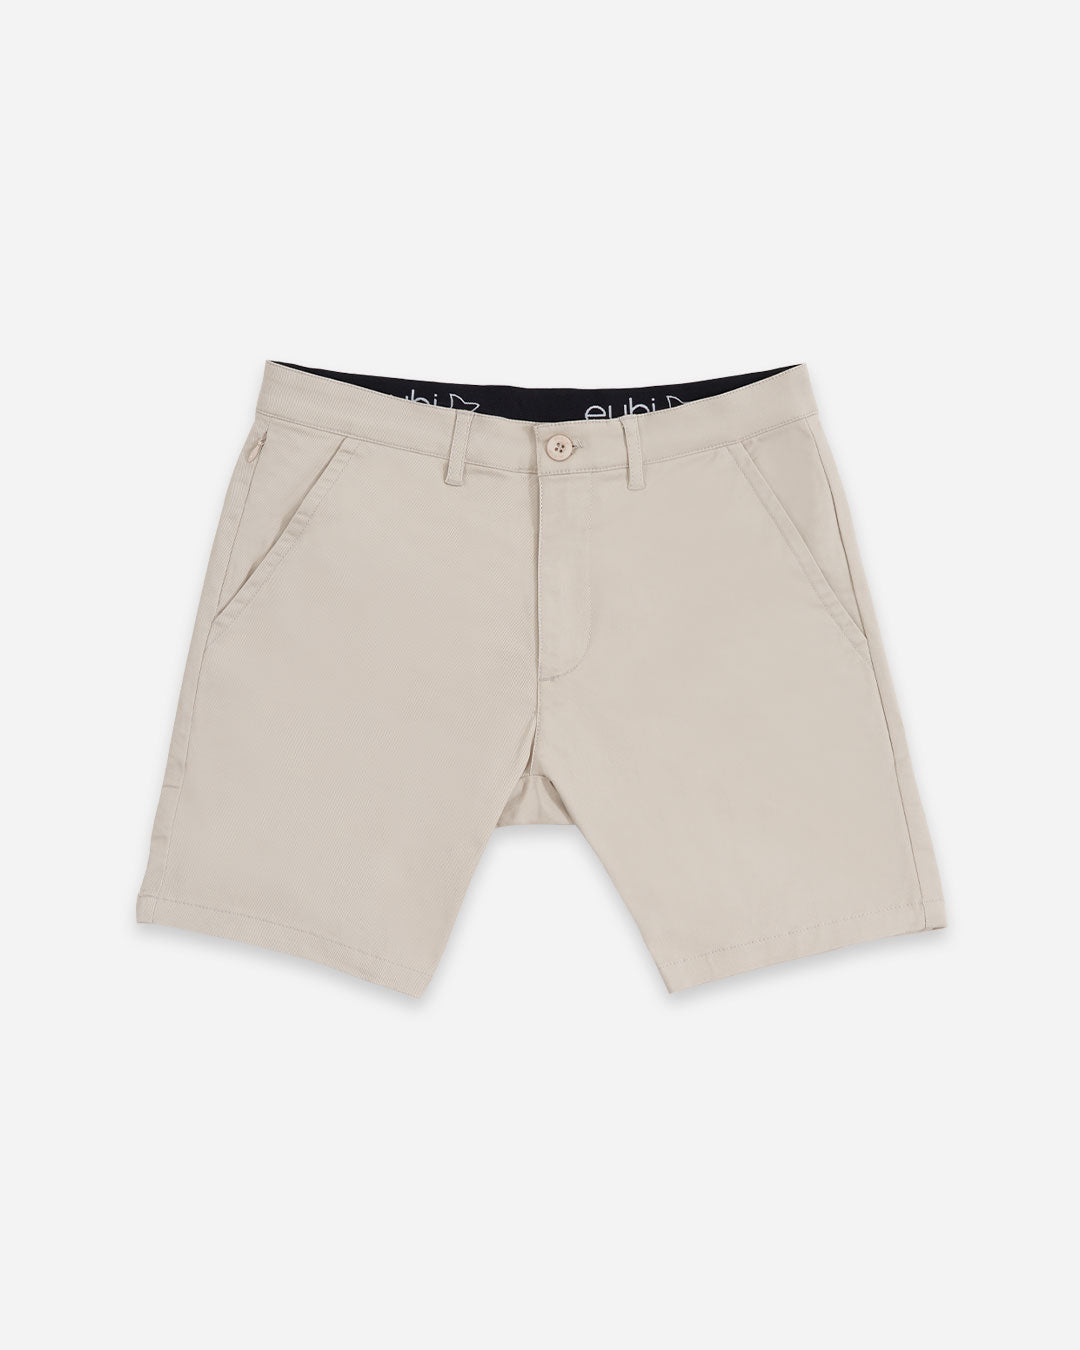 [Clearance] 7" All Day Chino Shorts 3.0